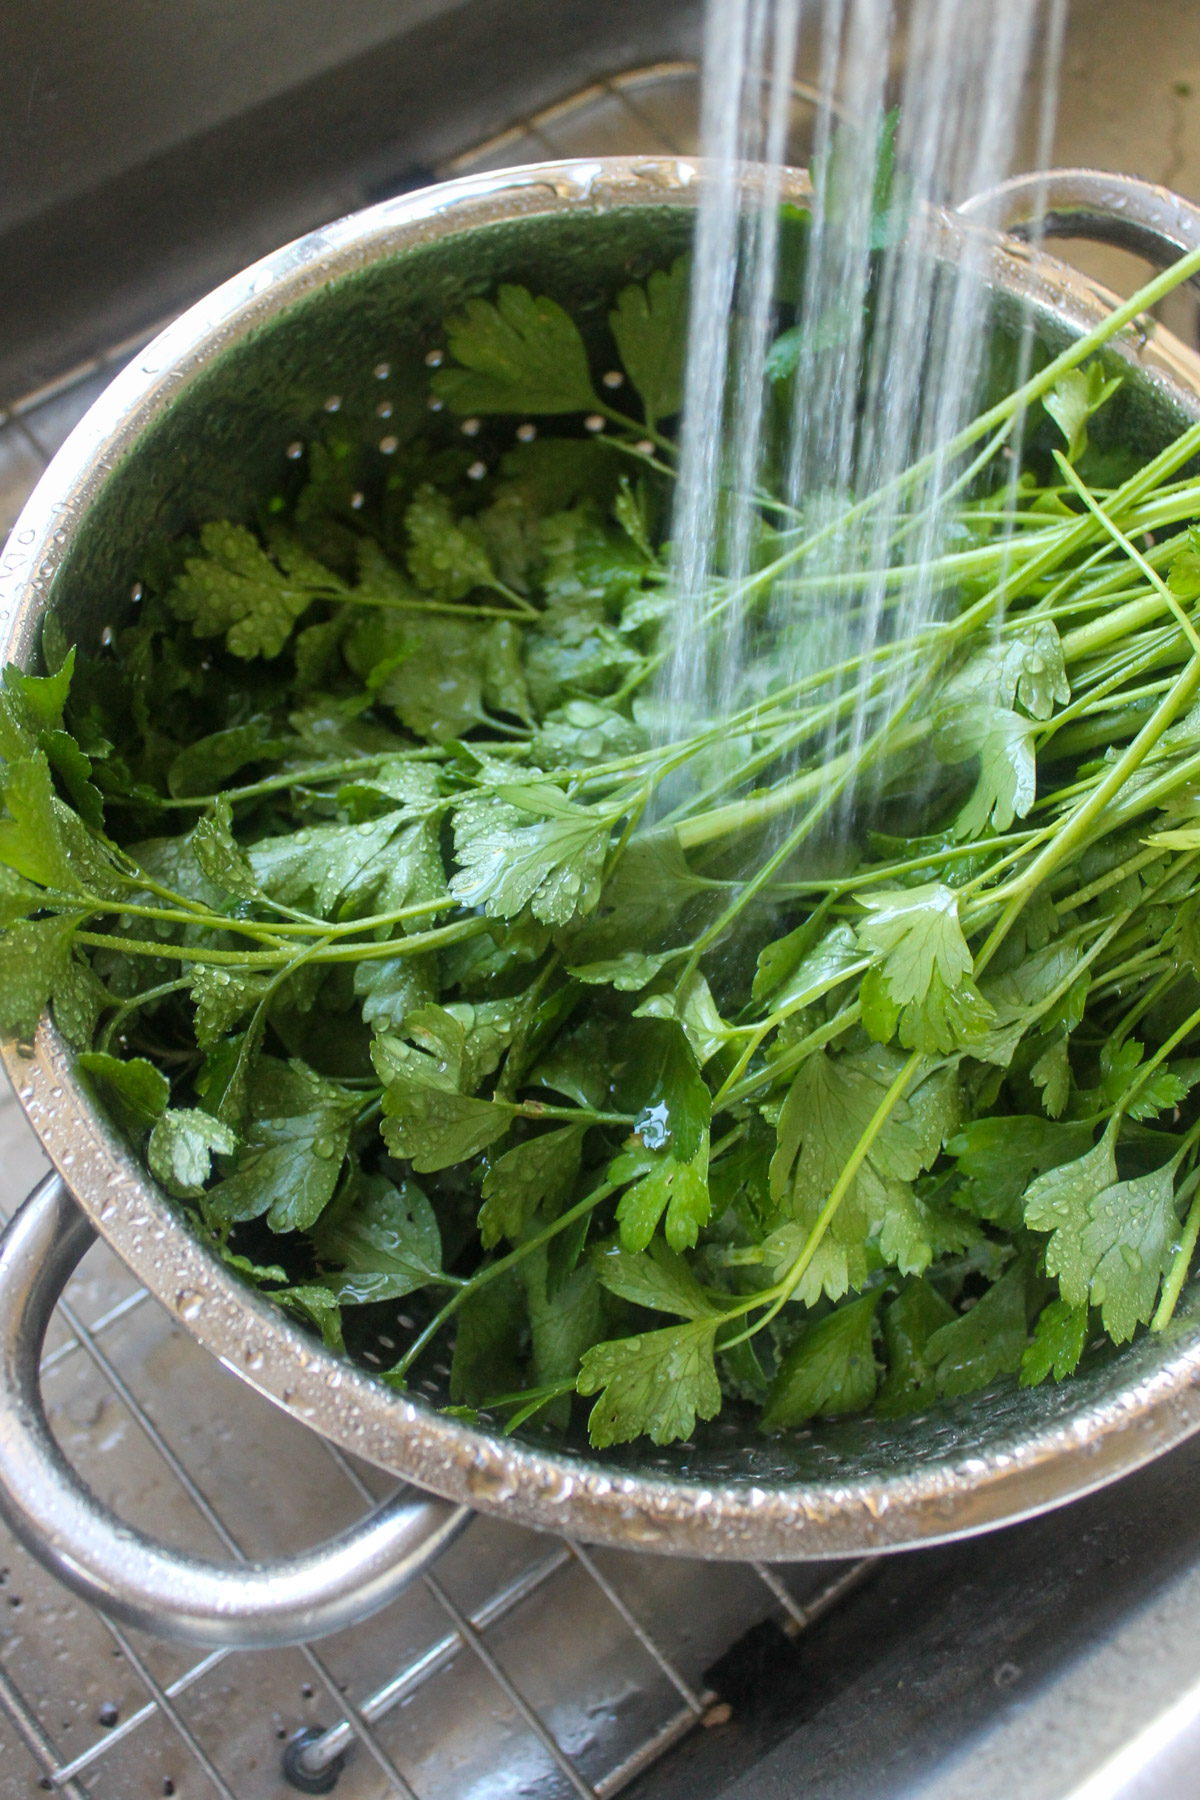 A colander of fresh herbs being washed in the sink.